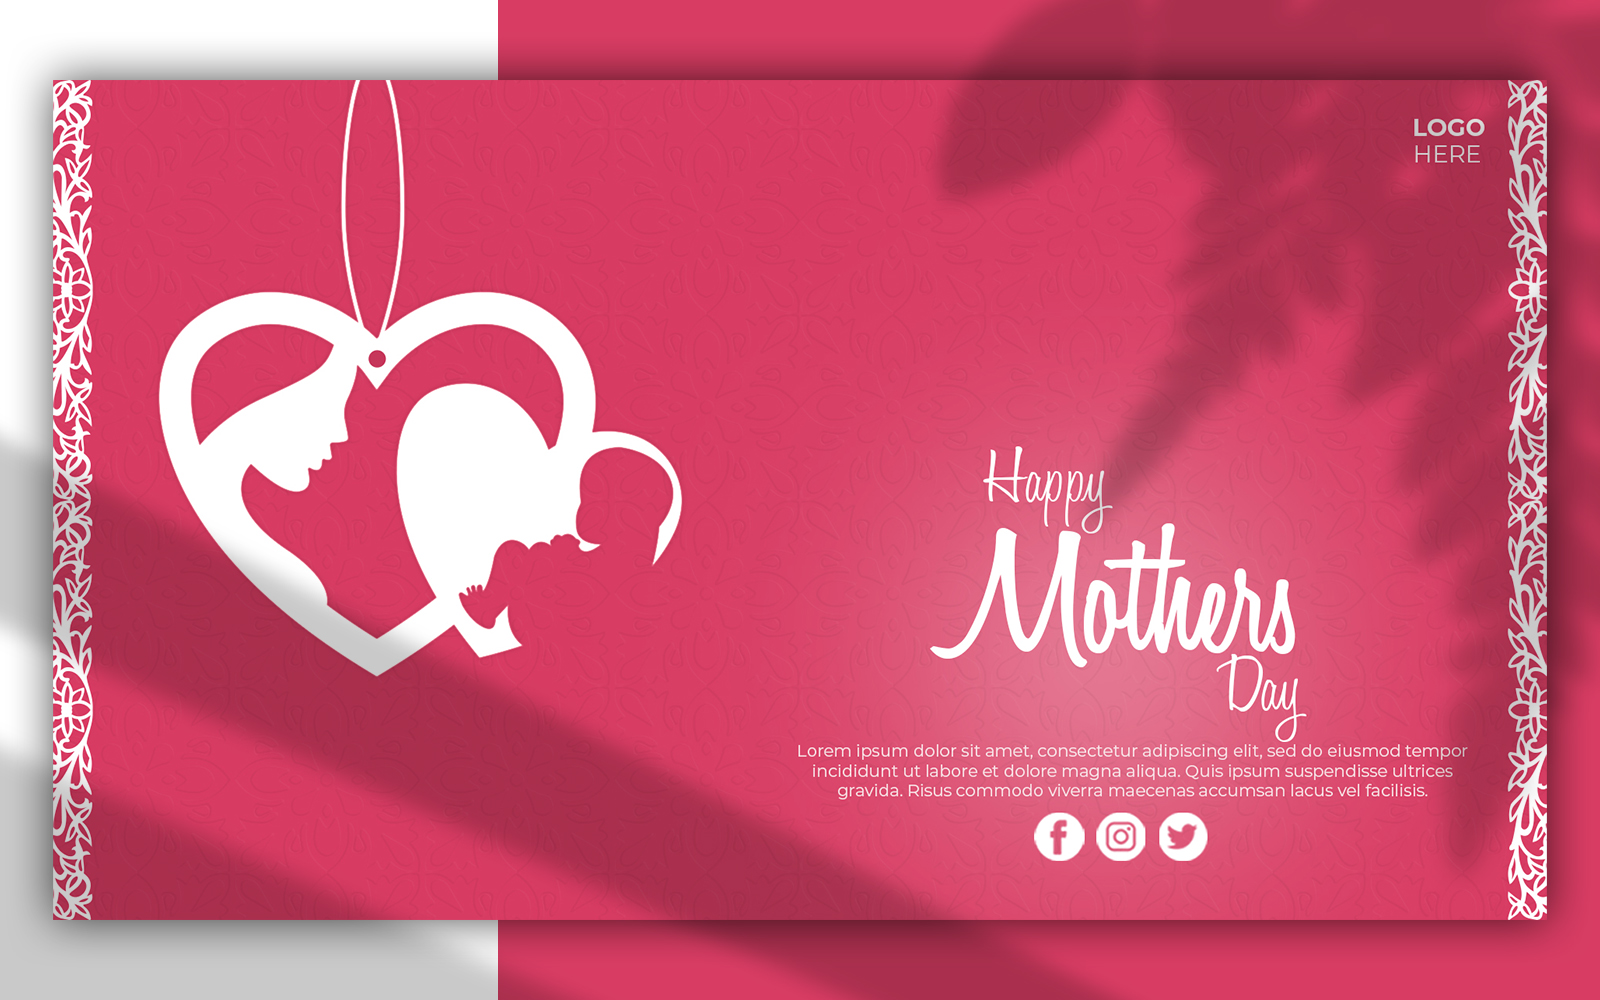 Happy Mothers Day Social Media Banner Post